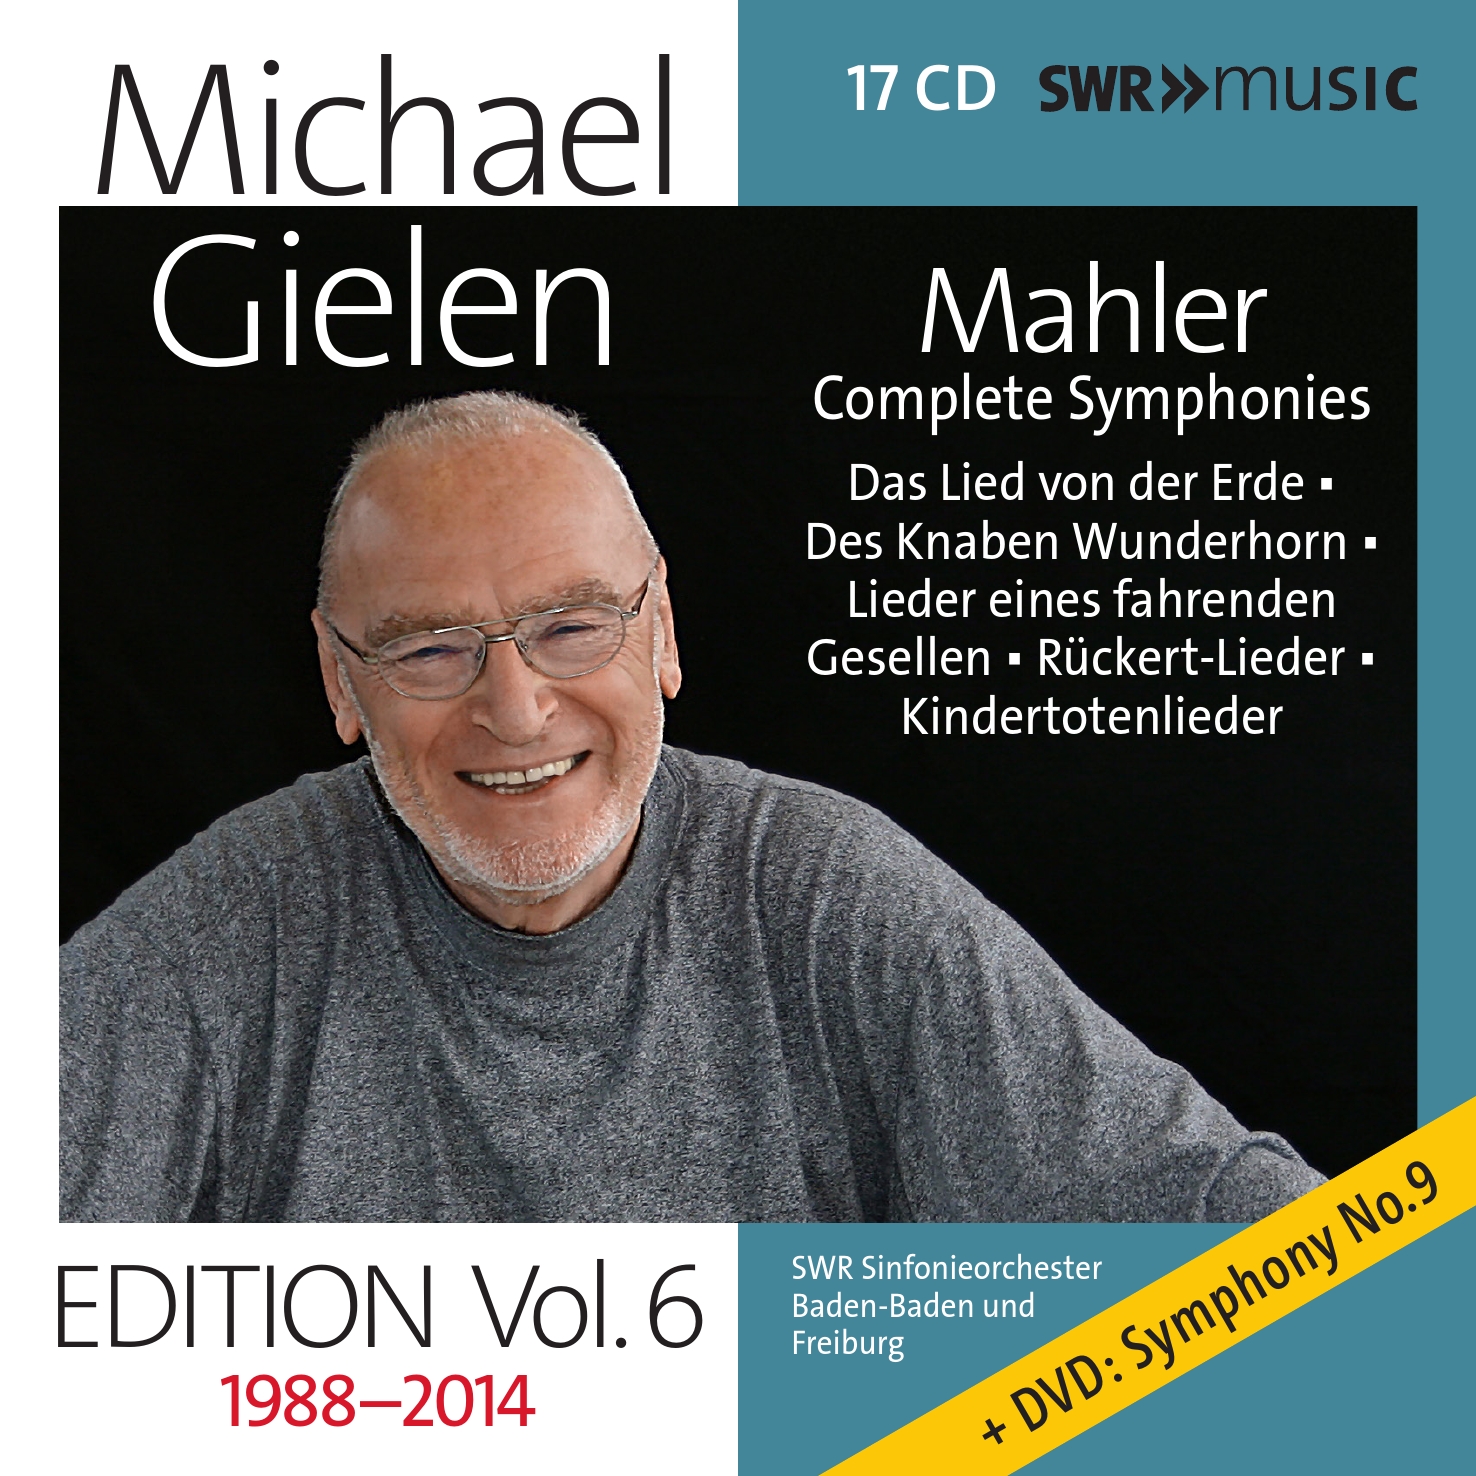 Michael Gielen Ed - Vol 6 Mahler Symphonies and. Song Cycles Recorded 1988-2014 cd03